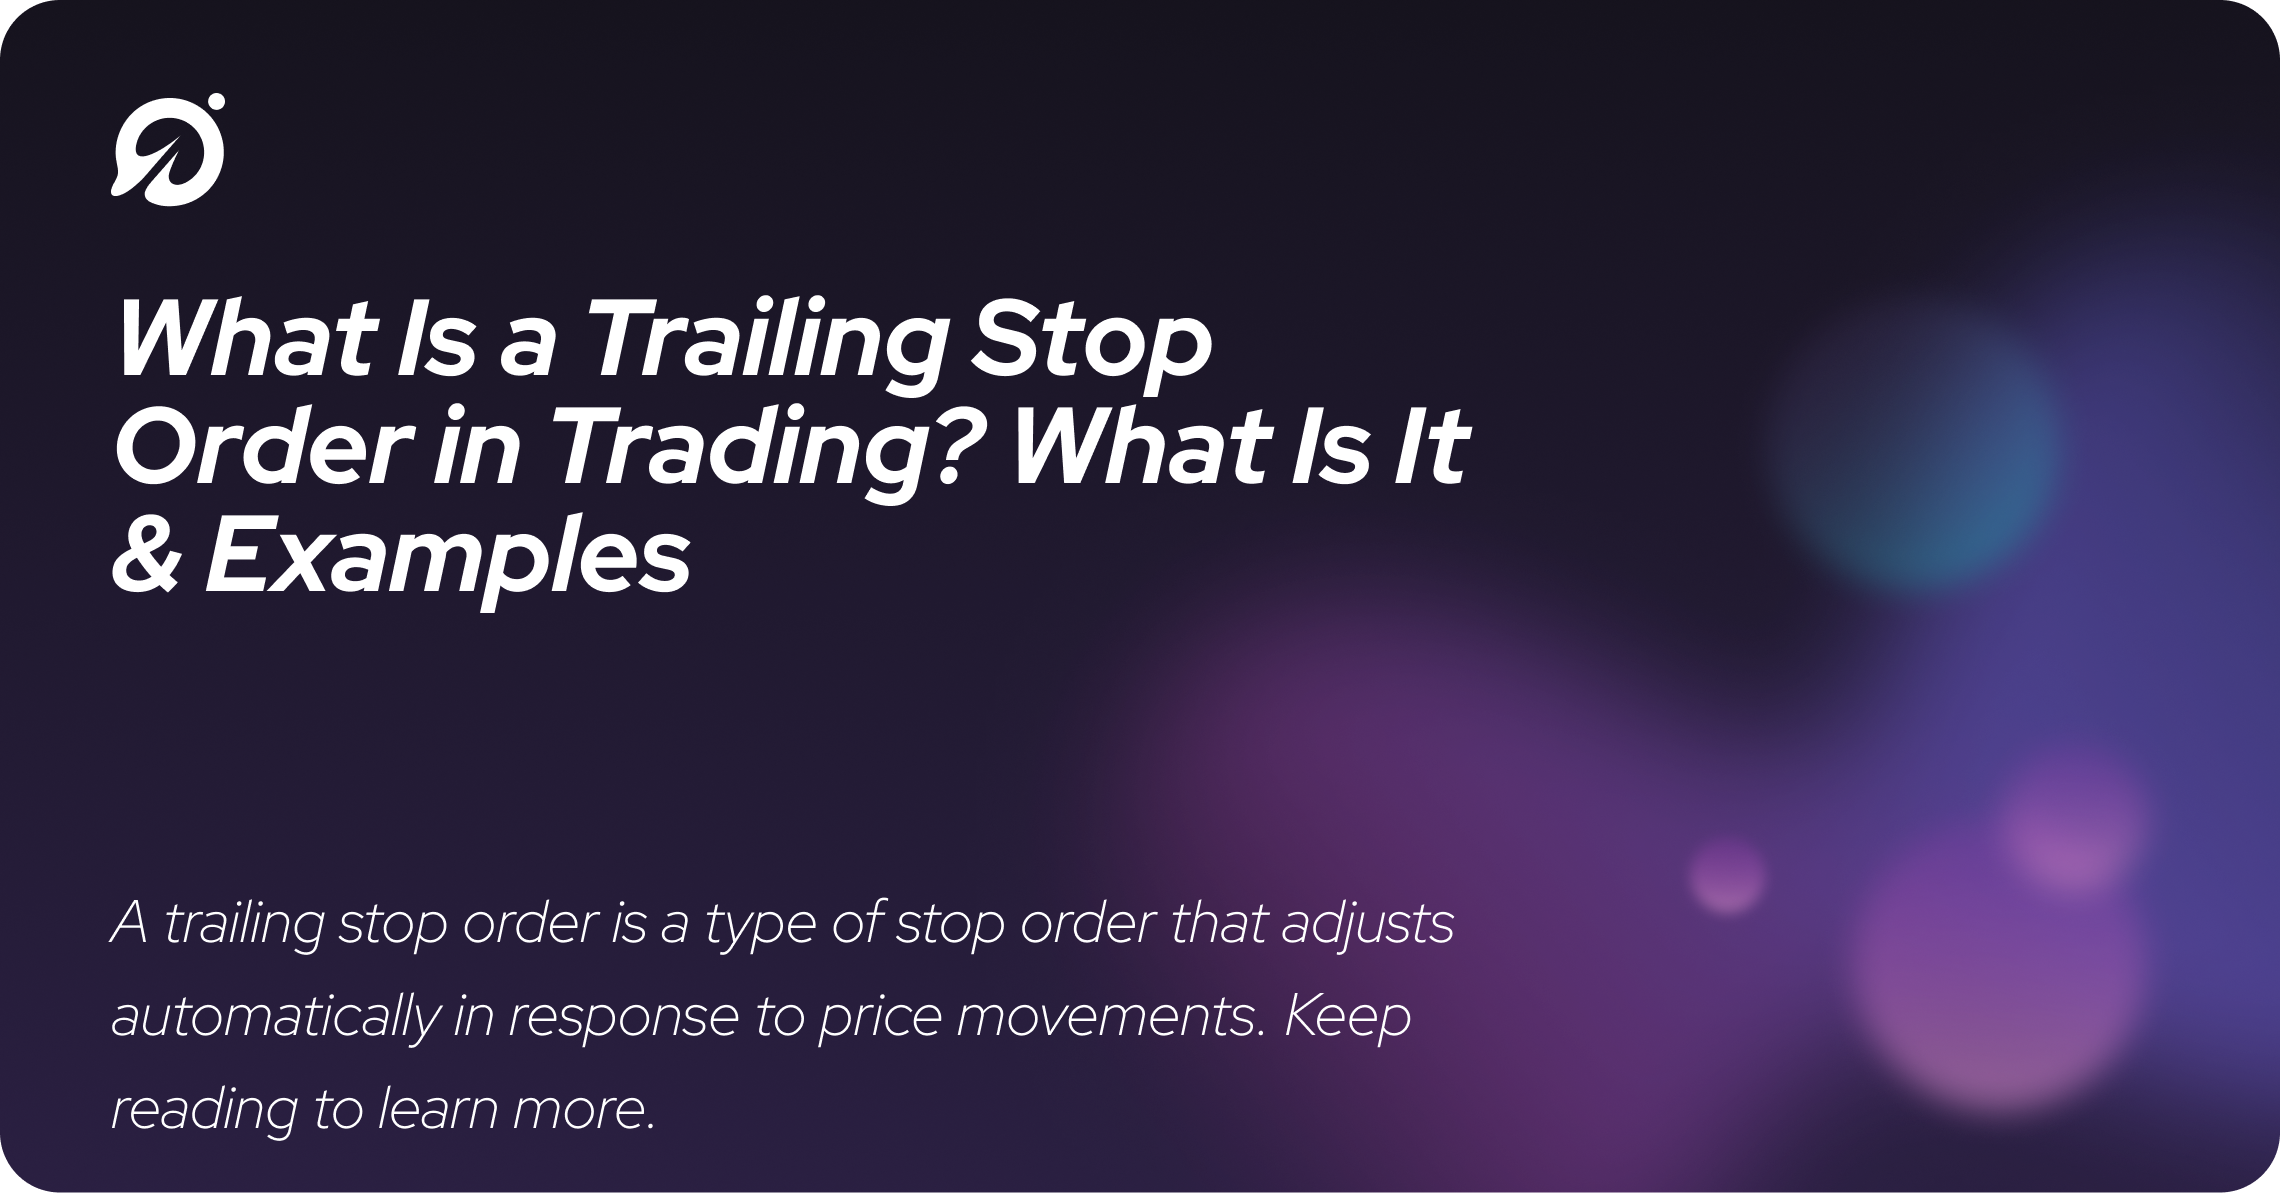 What Is a Trailing Stop Order in Trading? What Is It & Examples